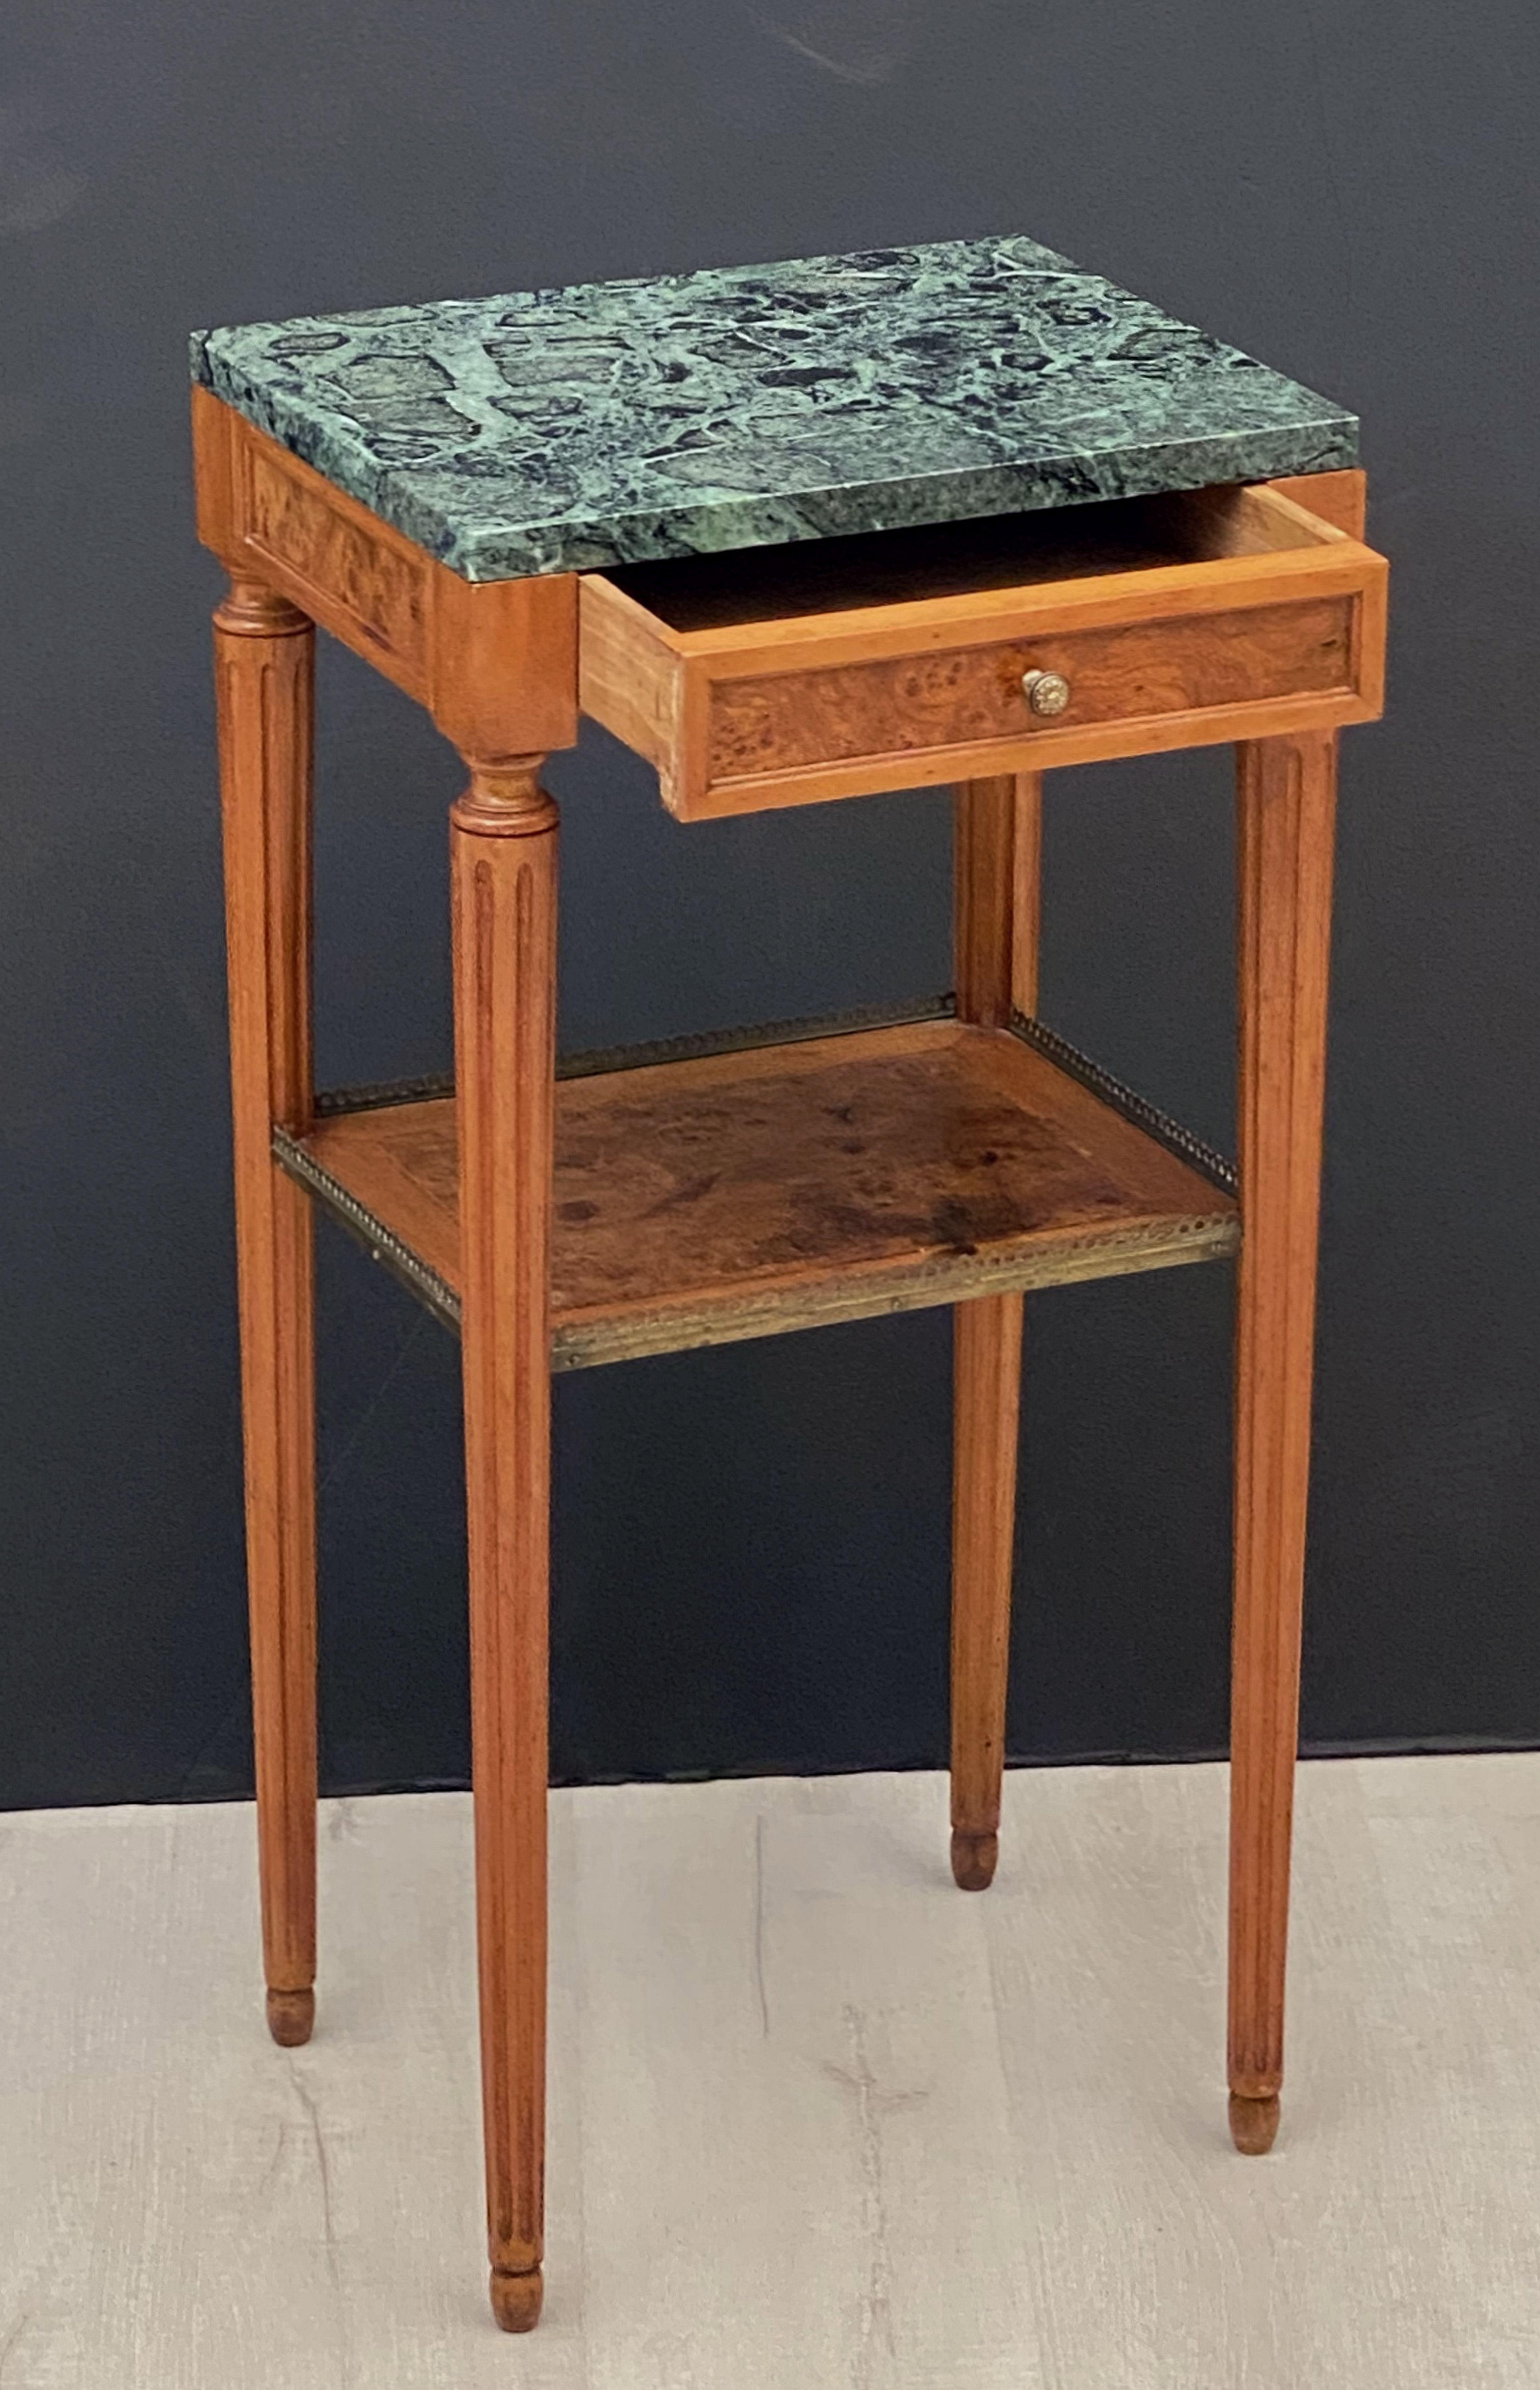 20th Century French Nightstands or Bedside Tables with Marble Tops, Individually Priced